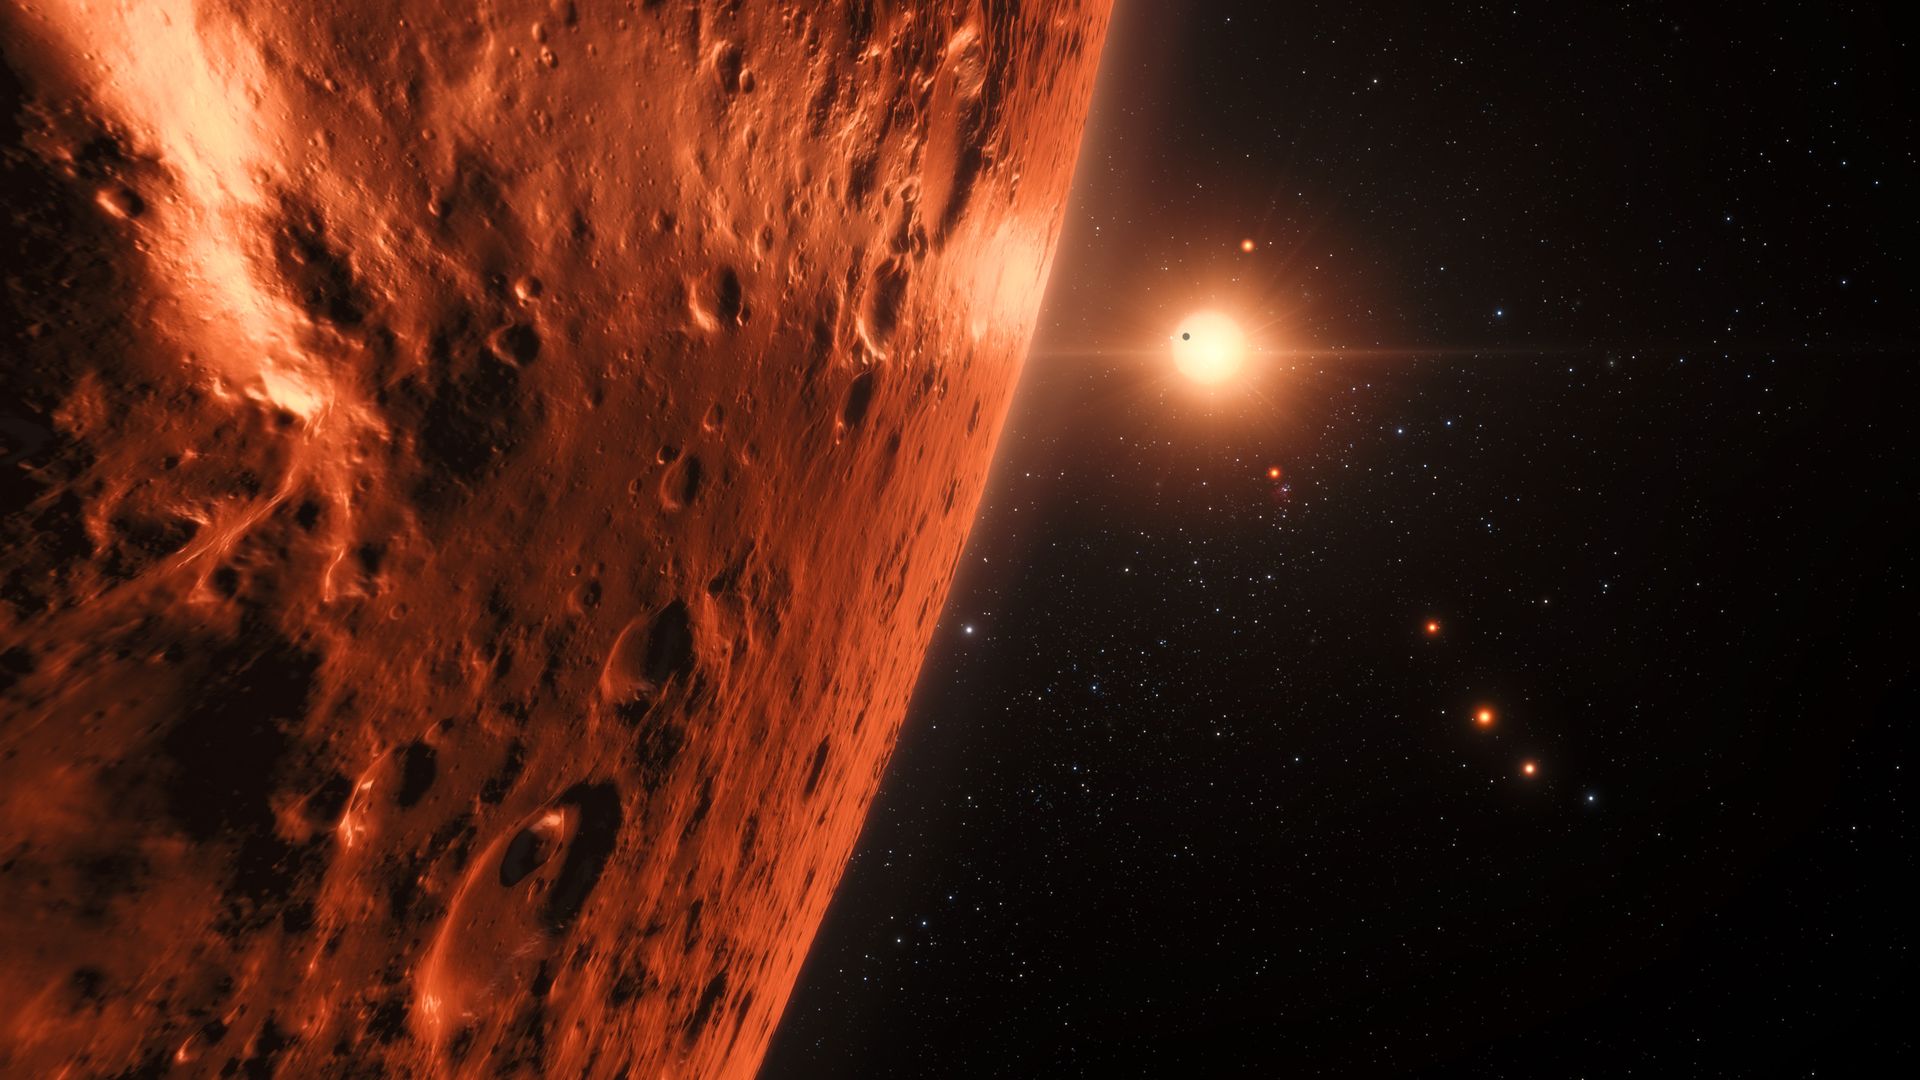 Artist's impression of view from planet in the TRAPPIST-1 planetary system